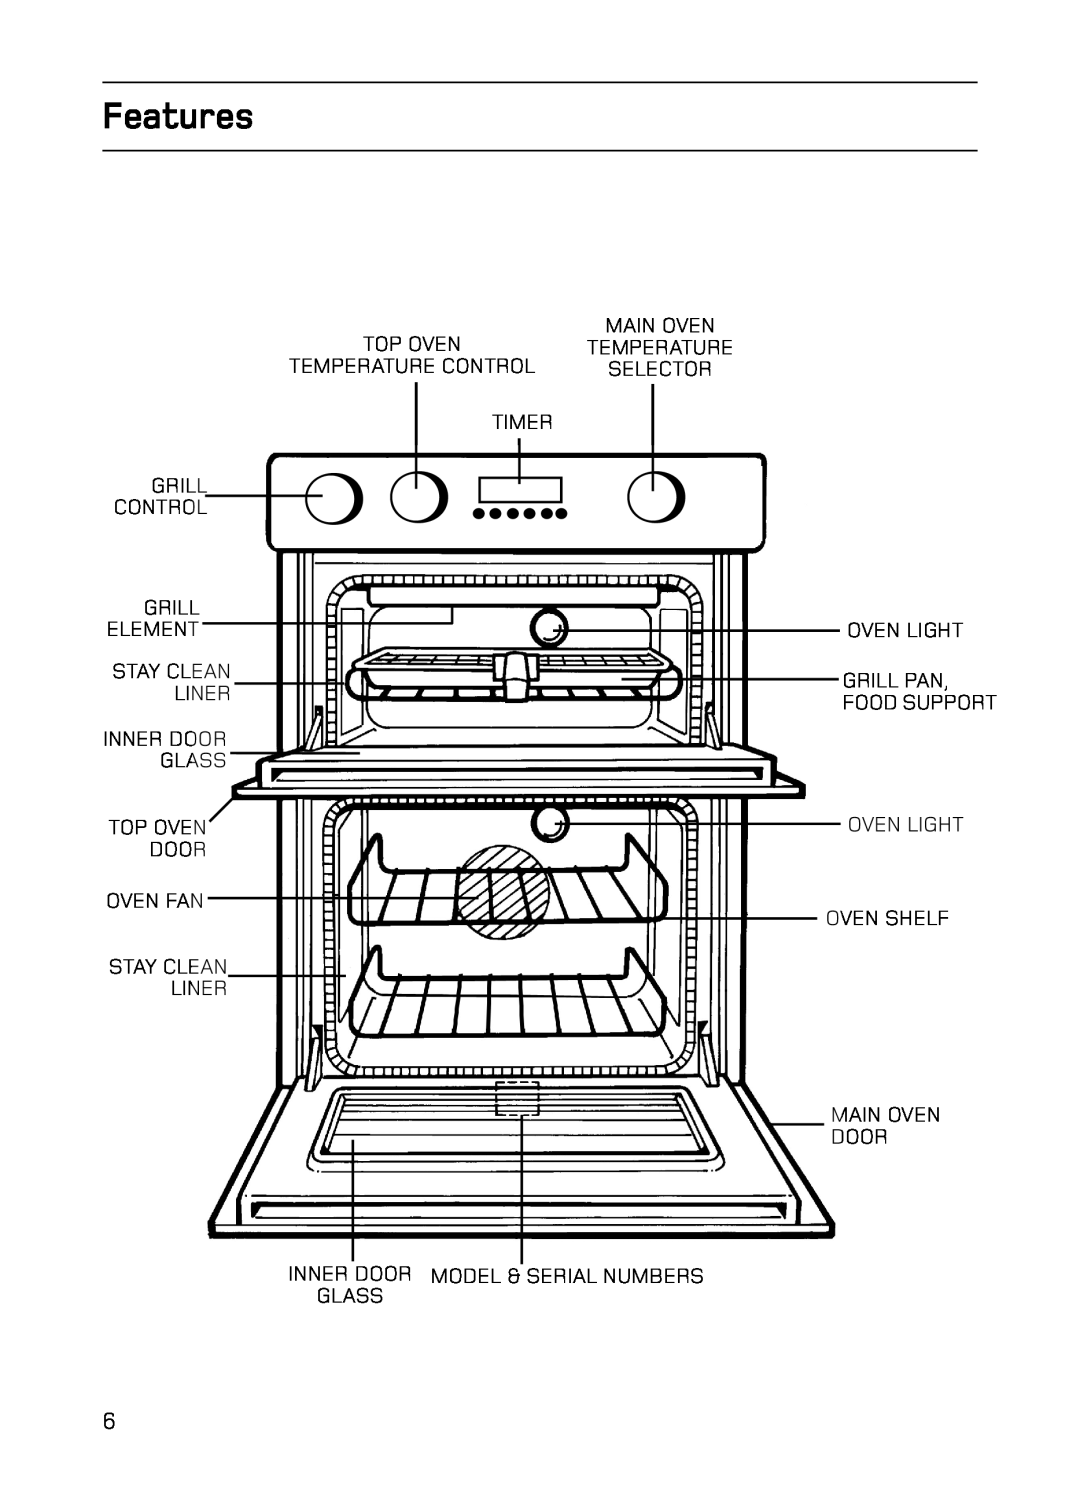 Hotpoint S130E Mk2 manual Features, Top Oven Temperature Control Timer, Grill, Oven Fan Stay Clean Liner, Oven Light 